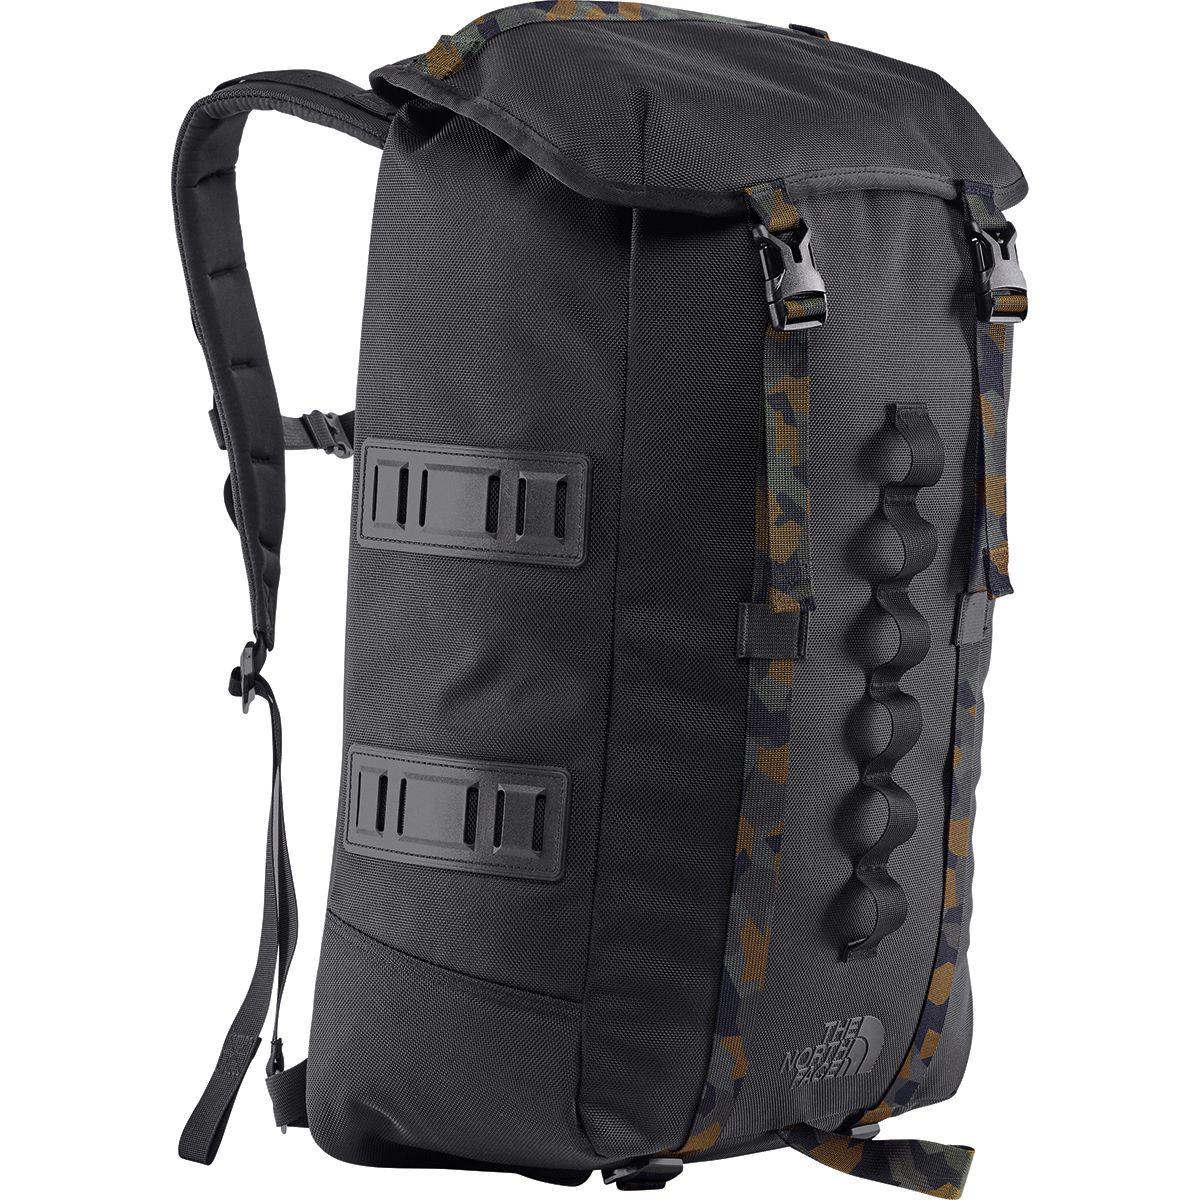 lineage ruck 37l backpack review